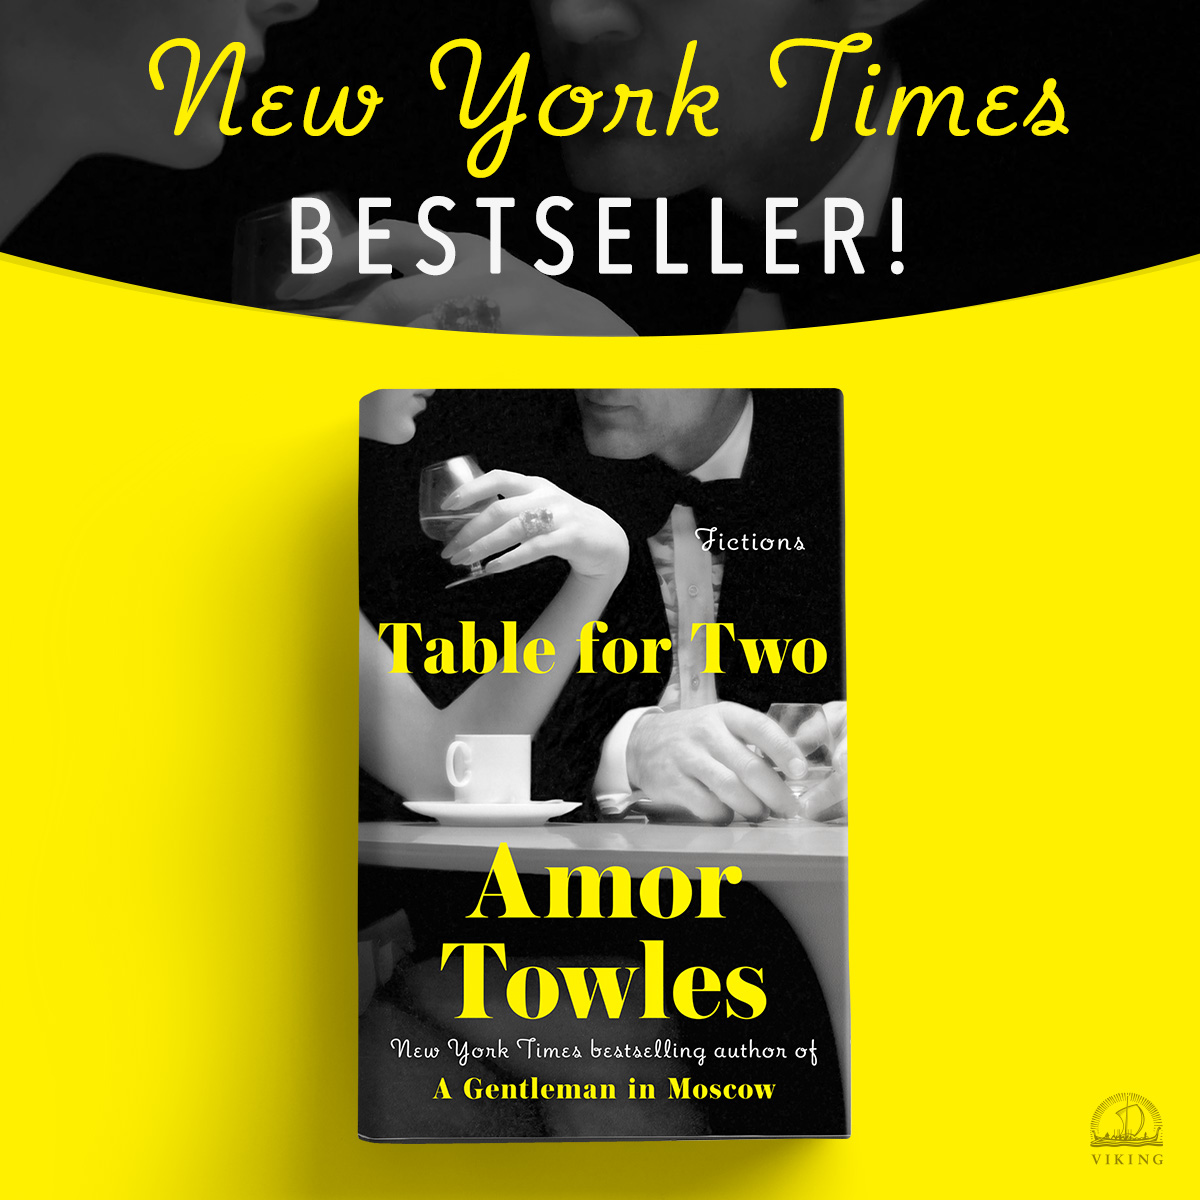 Congratulations to @amortowles! TABLE FOR TWO is a NEW YORK TIMES BESTSELLER! 🍾🎉 ✨ 'A knockout collection.' @nytimes ✨ 'Delightful.' @people ✨ 'A can't-miss.' @ChicagoRevBooks ✨ 'Superb.' @latimes Get your copy now 👉 bit.ly/4583dT4